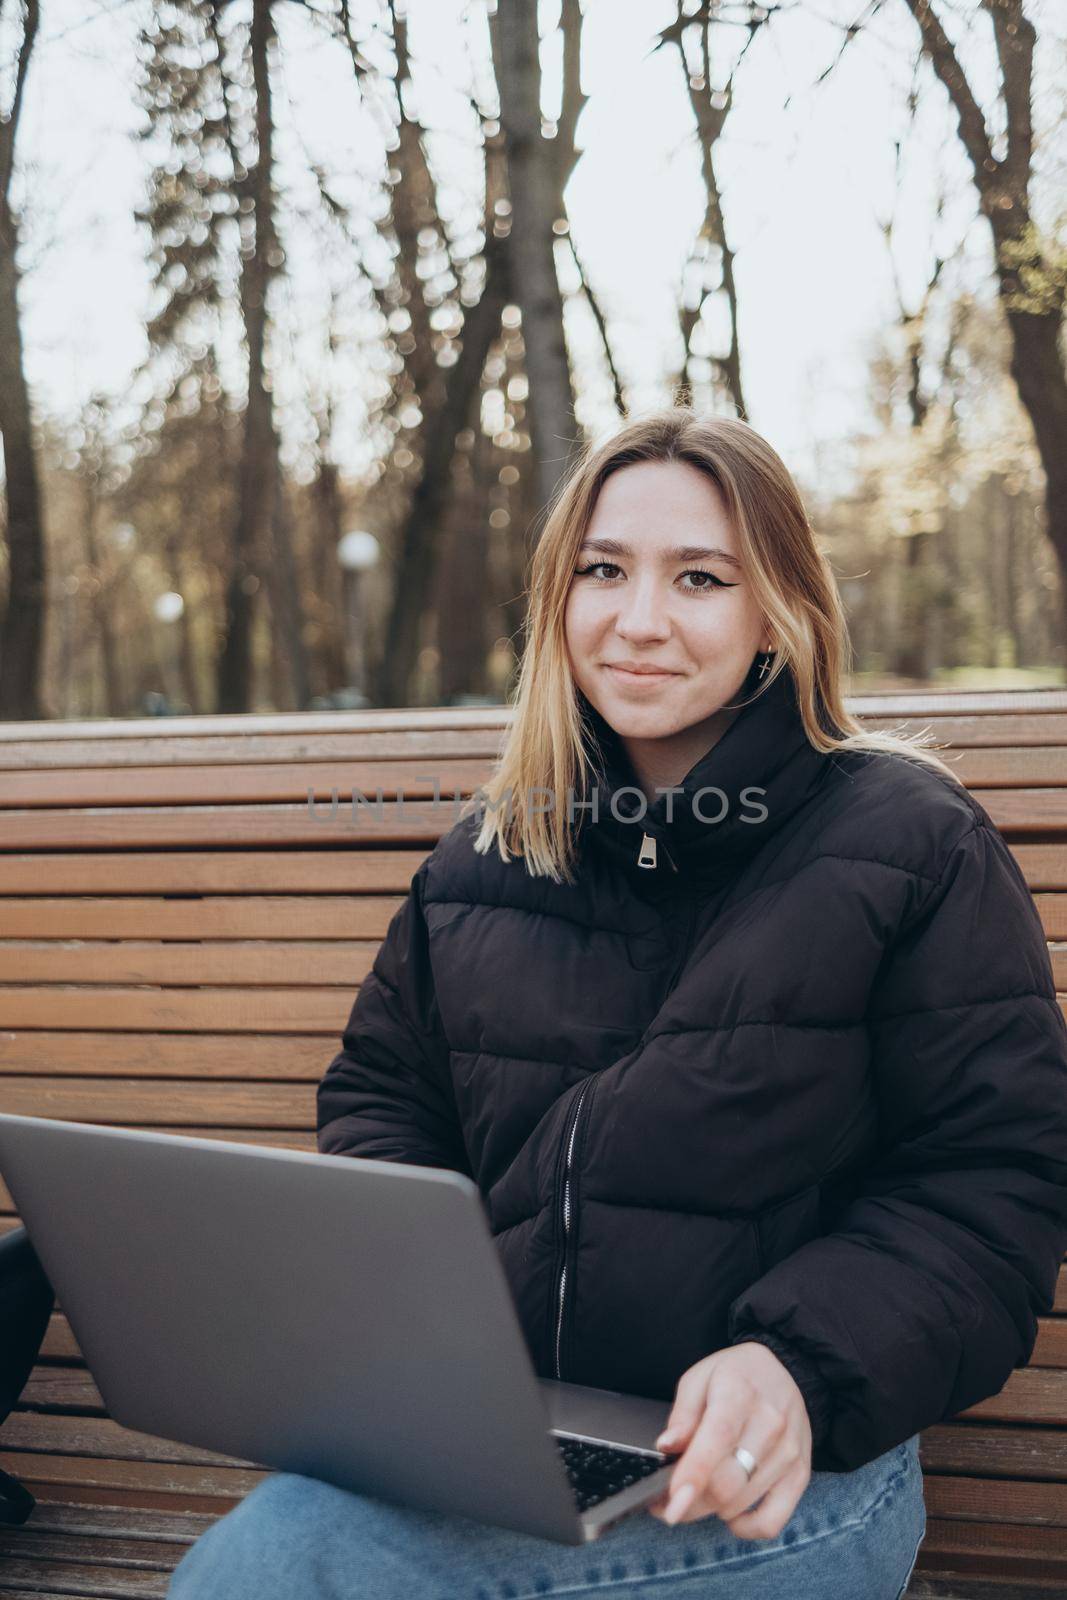 Smiling woman studying on laptop at park by Symonenko